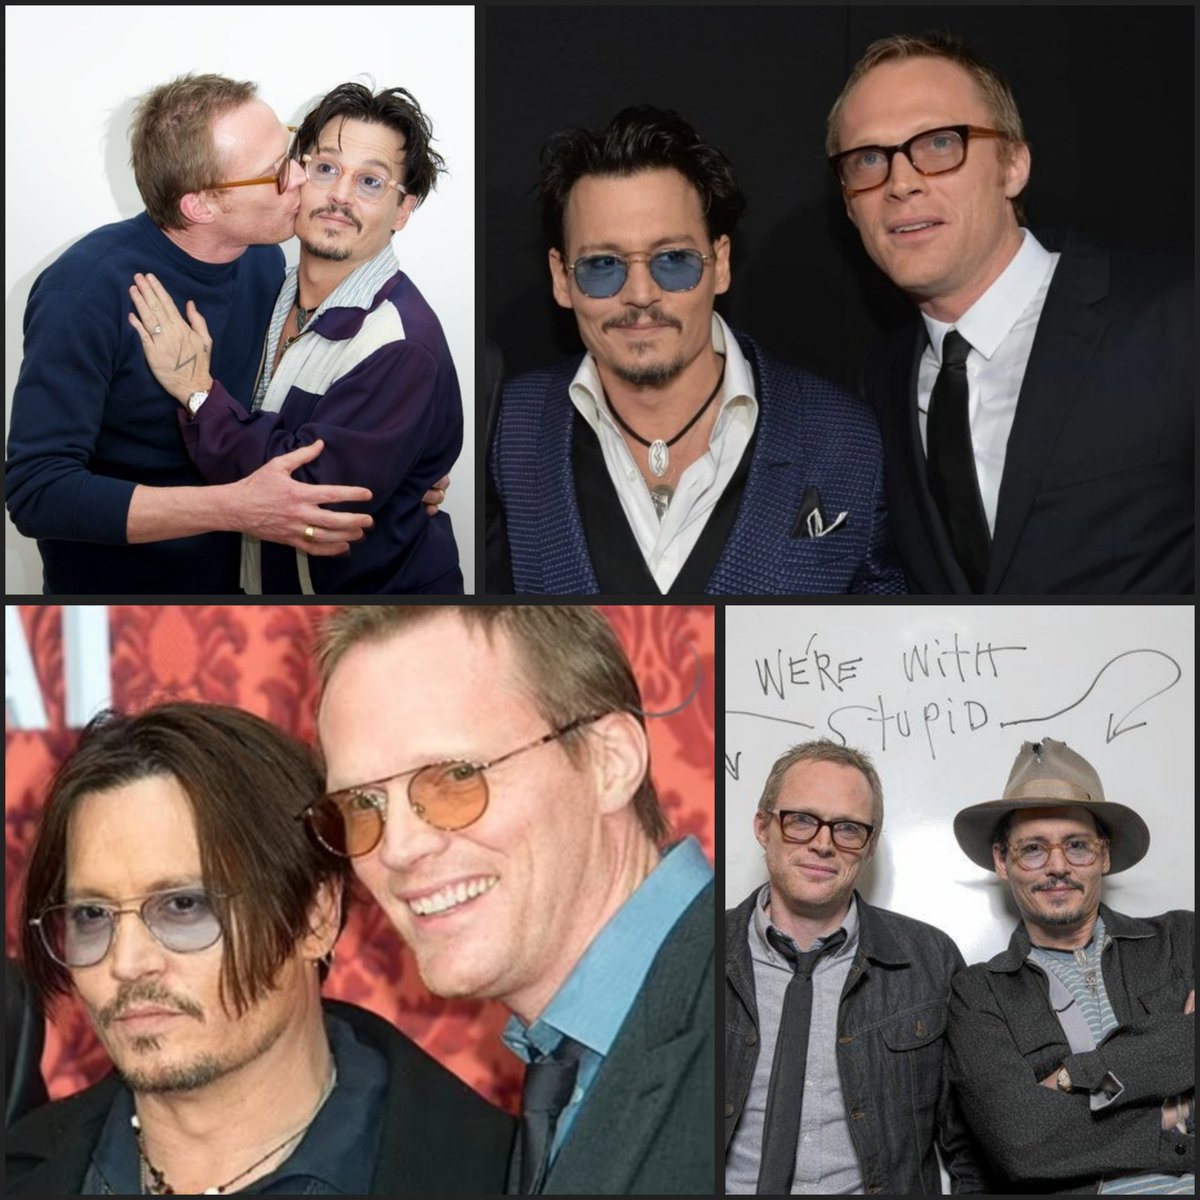 Also a Happy 52th birthday to the one and only Paul Bettany.🥳

PS: Love their friendship.😊

#HappyBirthdayPaulBettany
#PaulBettany
#JohnnyDeppKeepsWinning 
#JohnnyDepp